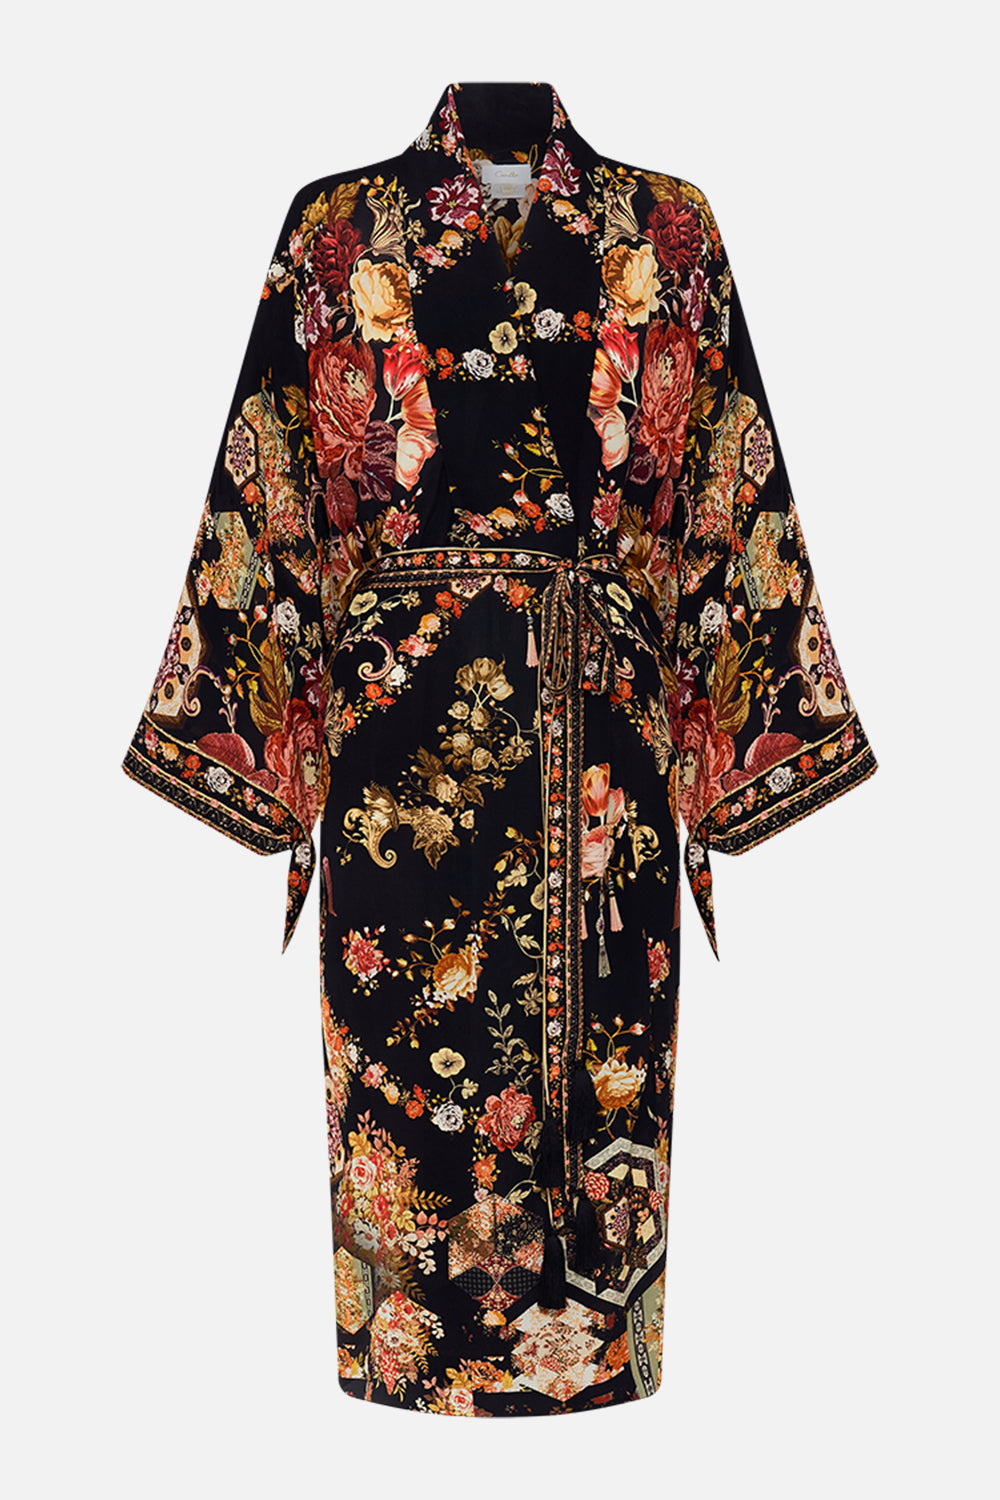 CAMILLA Floral Oversized Layer with Tie Sleeve in Stitched in Time